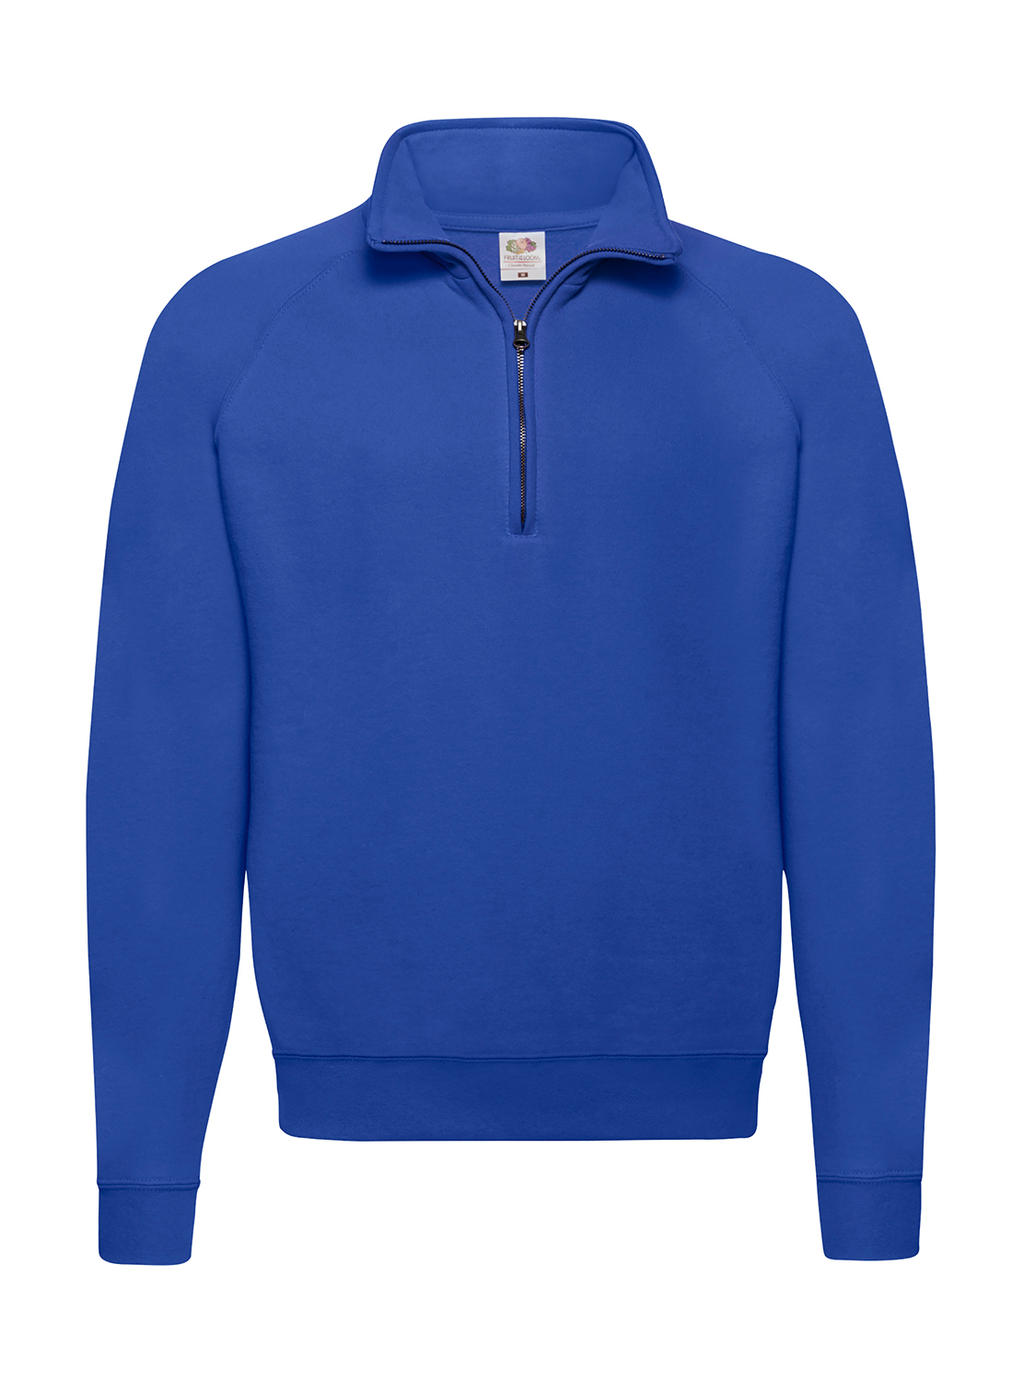  Classic Zip Neck Sweat in Farbe Royal Blue